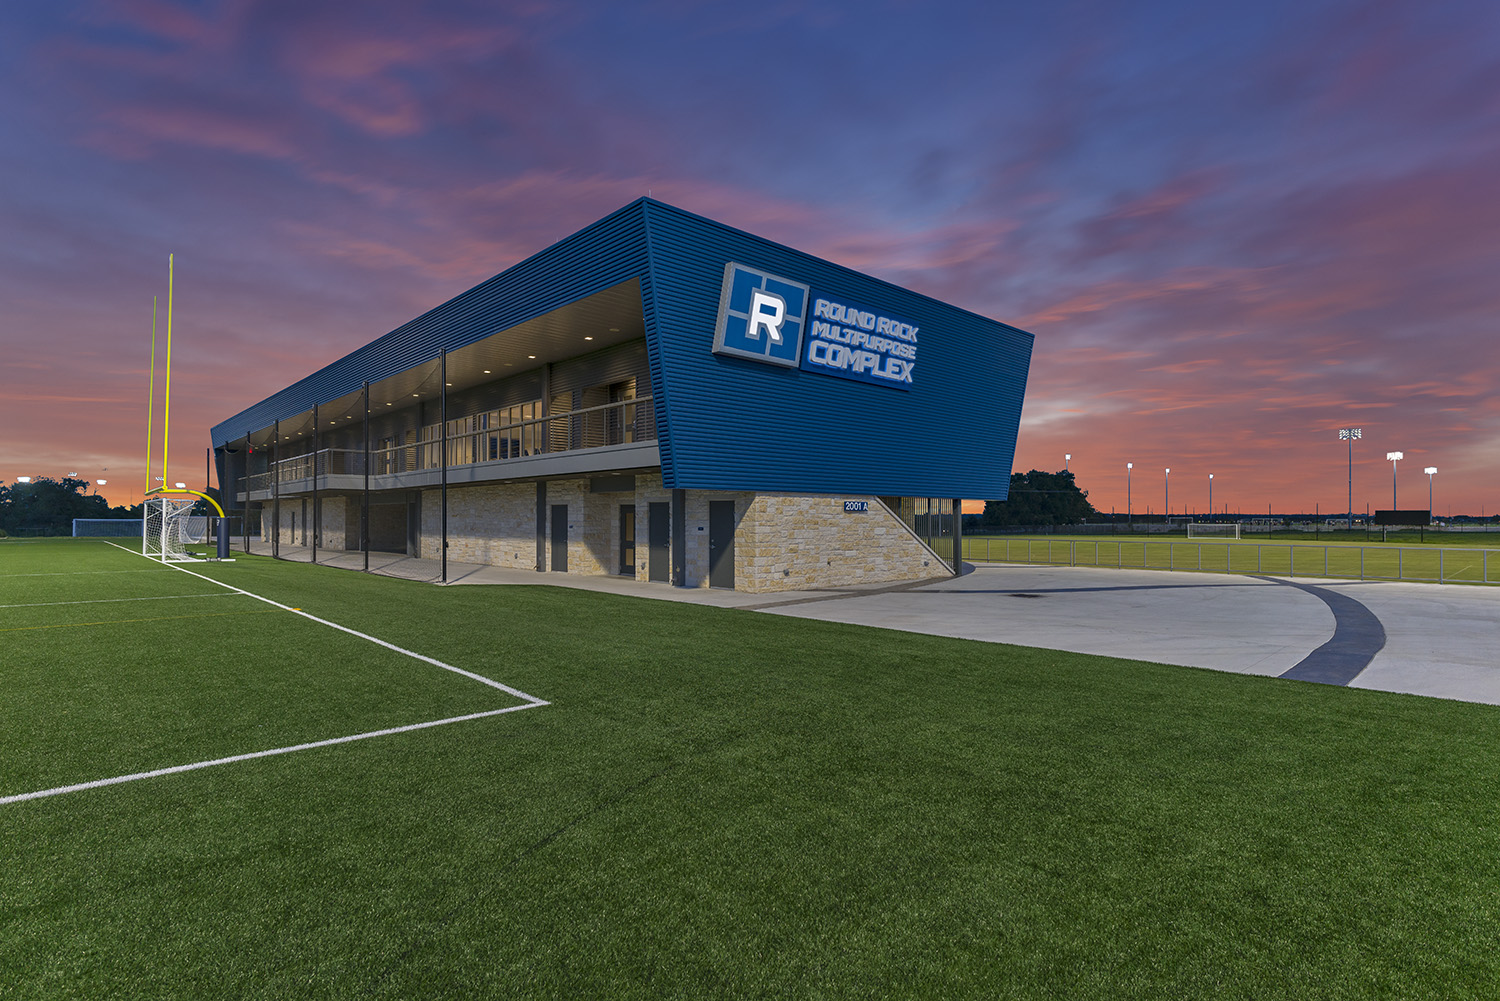 Photo of the Round Rock Multipurpose Complex clubhouse at sunset, part of the family of sports facilities in Round Rock